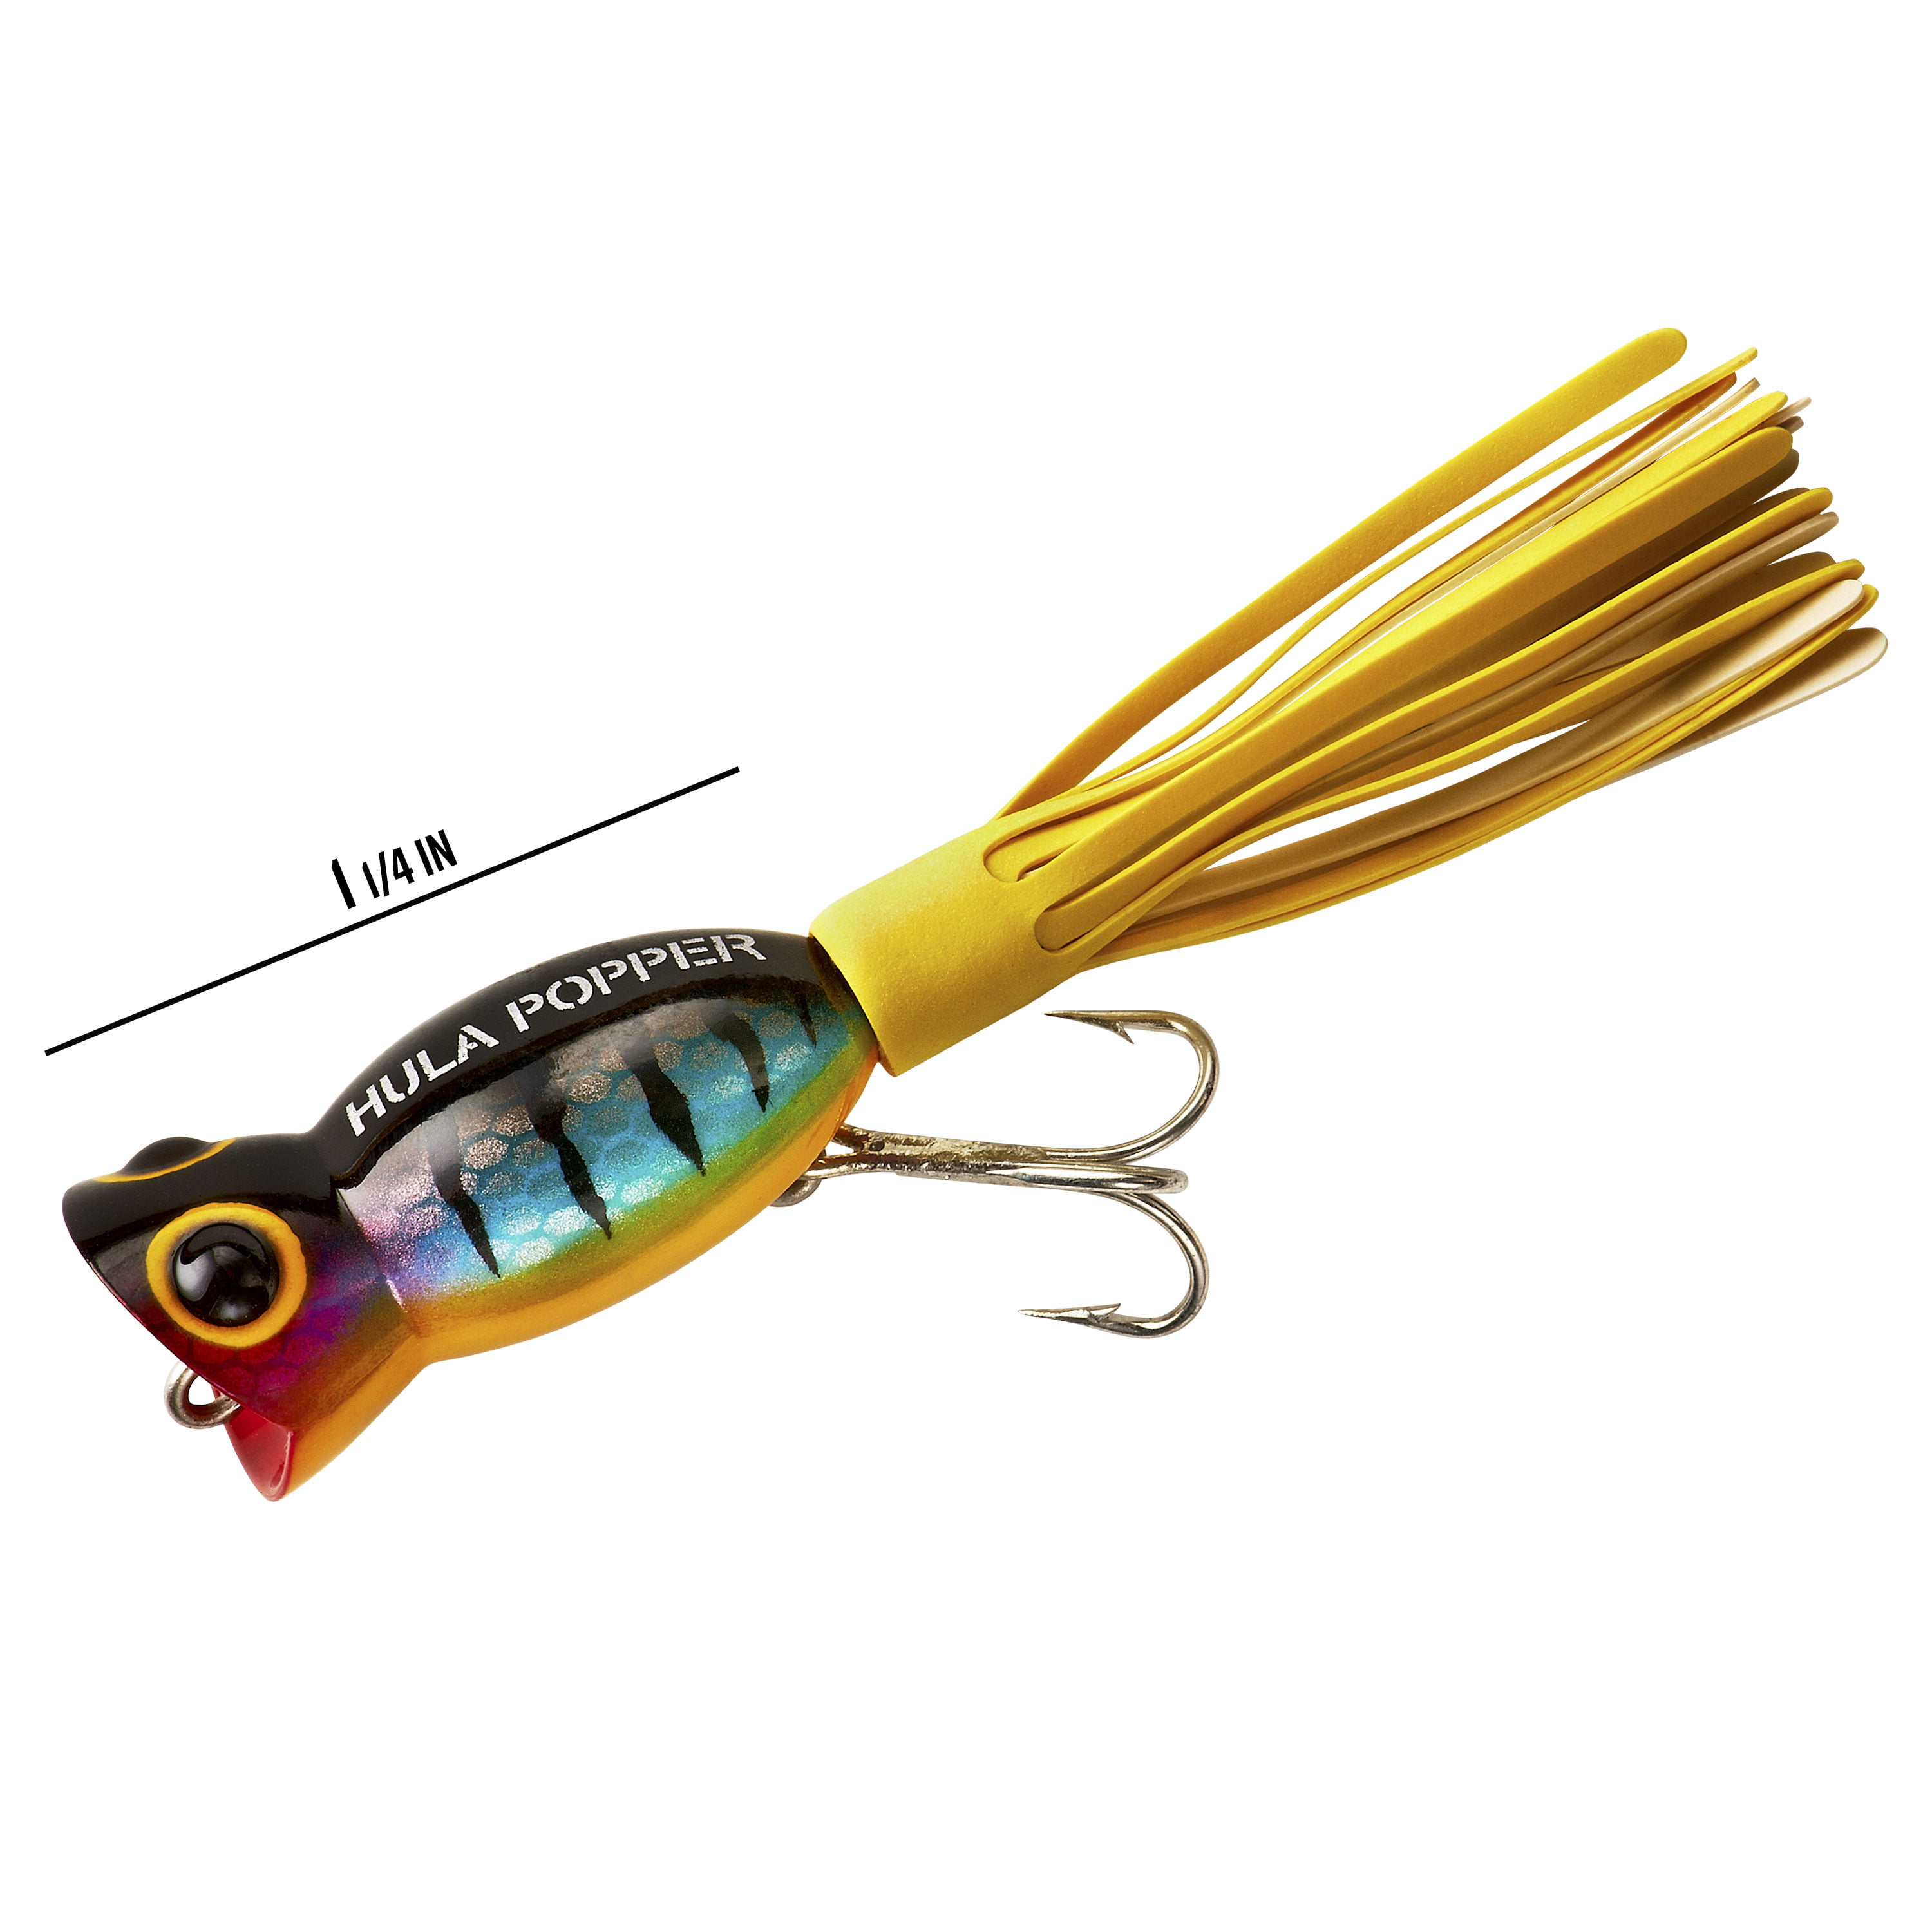 Arbogast Hula Popper Topwater Baits 1 1/4